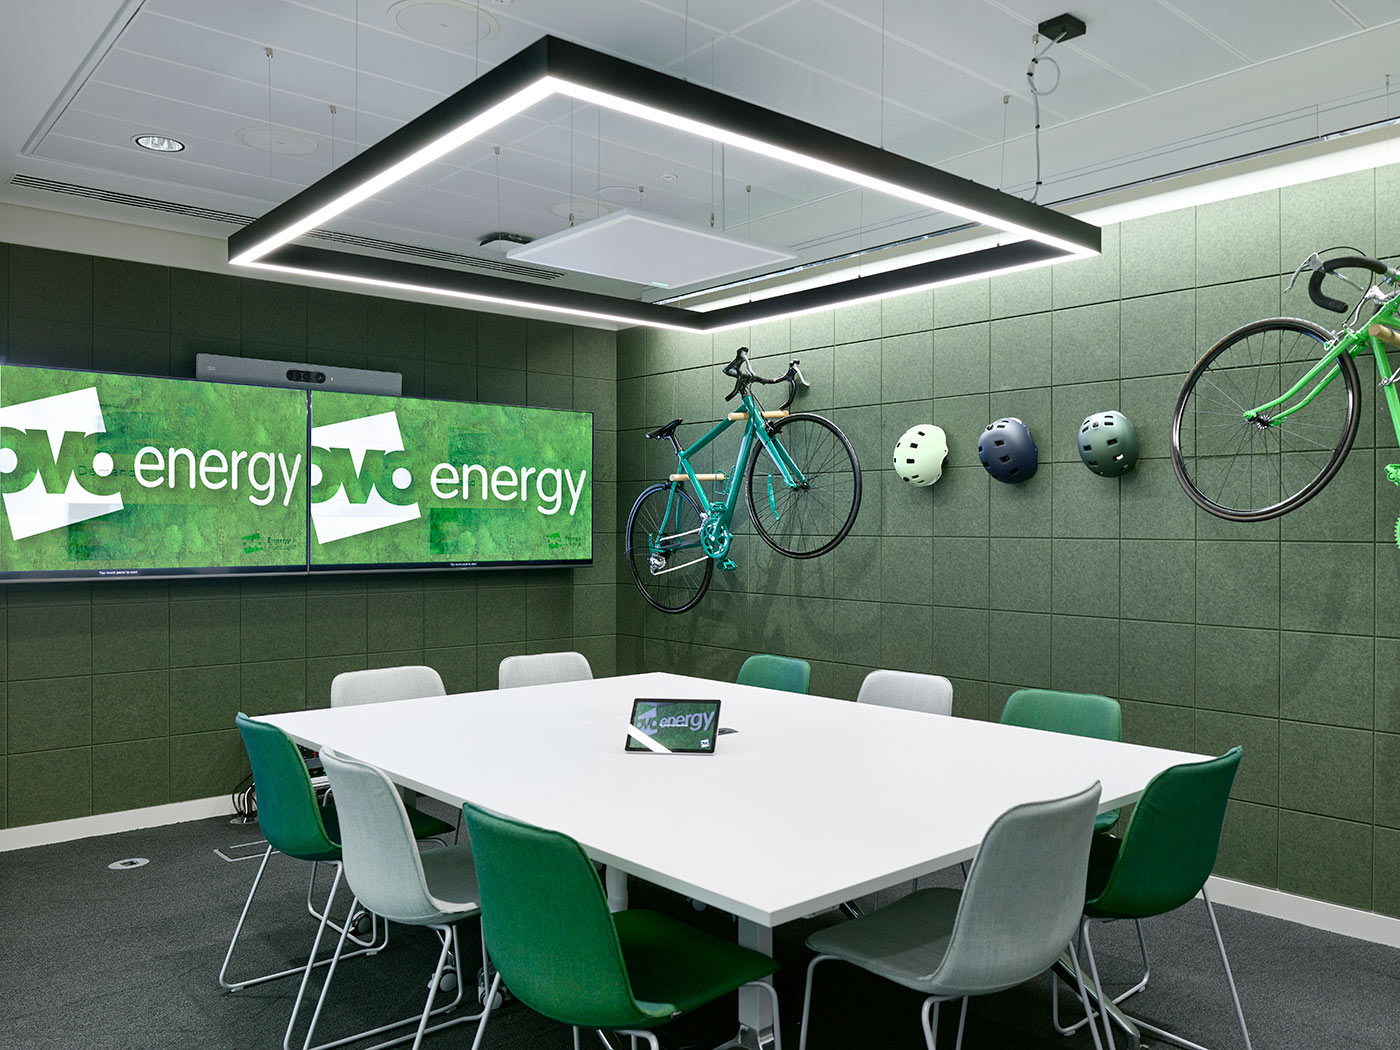 Meeting room with green walls and a table and chairs in foreground. The brand name OVO energy is on a board on the wall and bicycles are hanging on one wall as a display